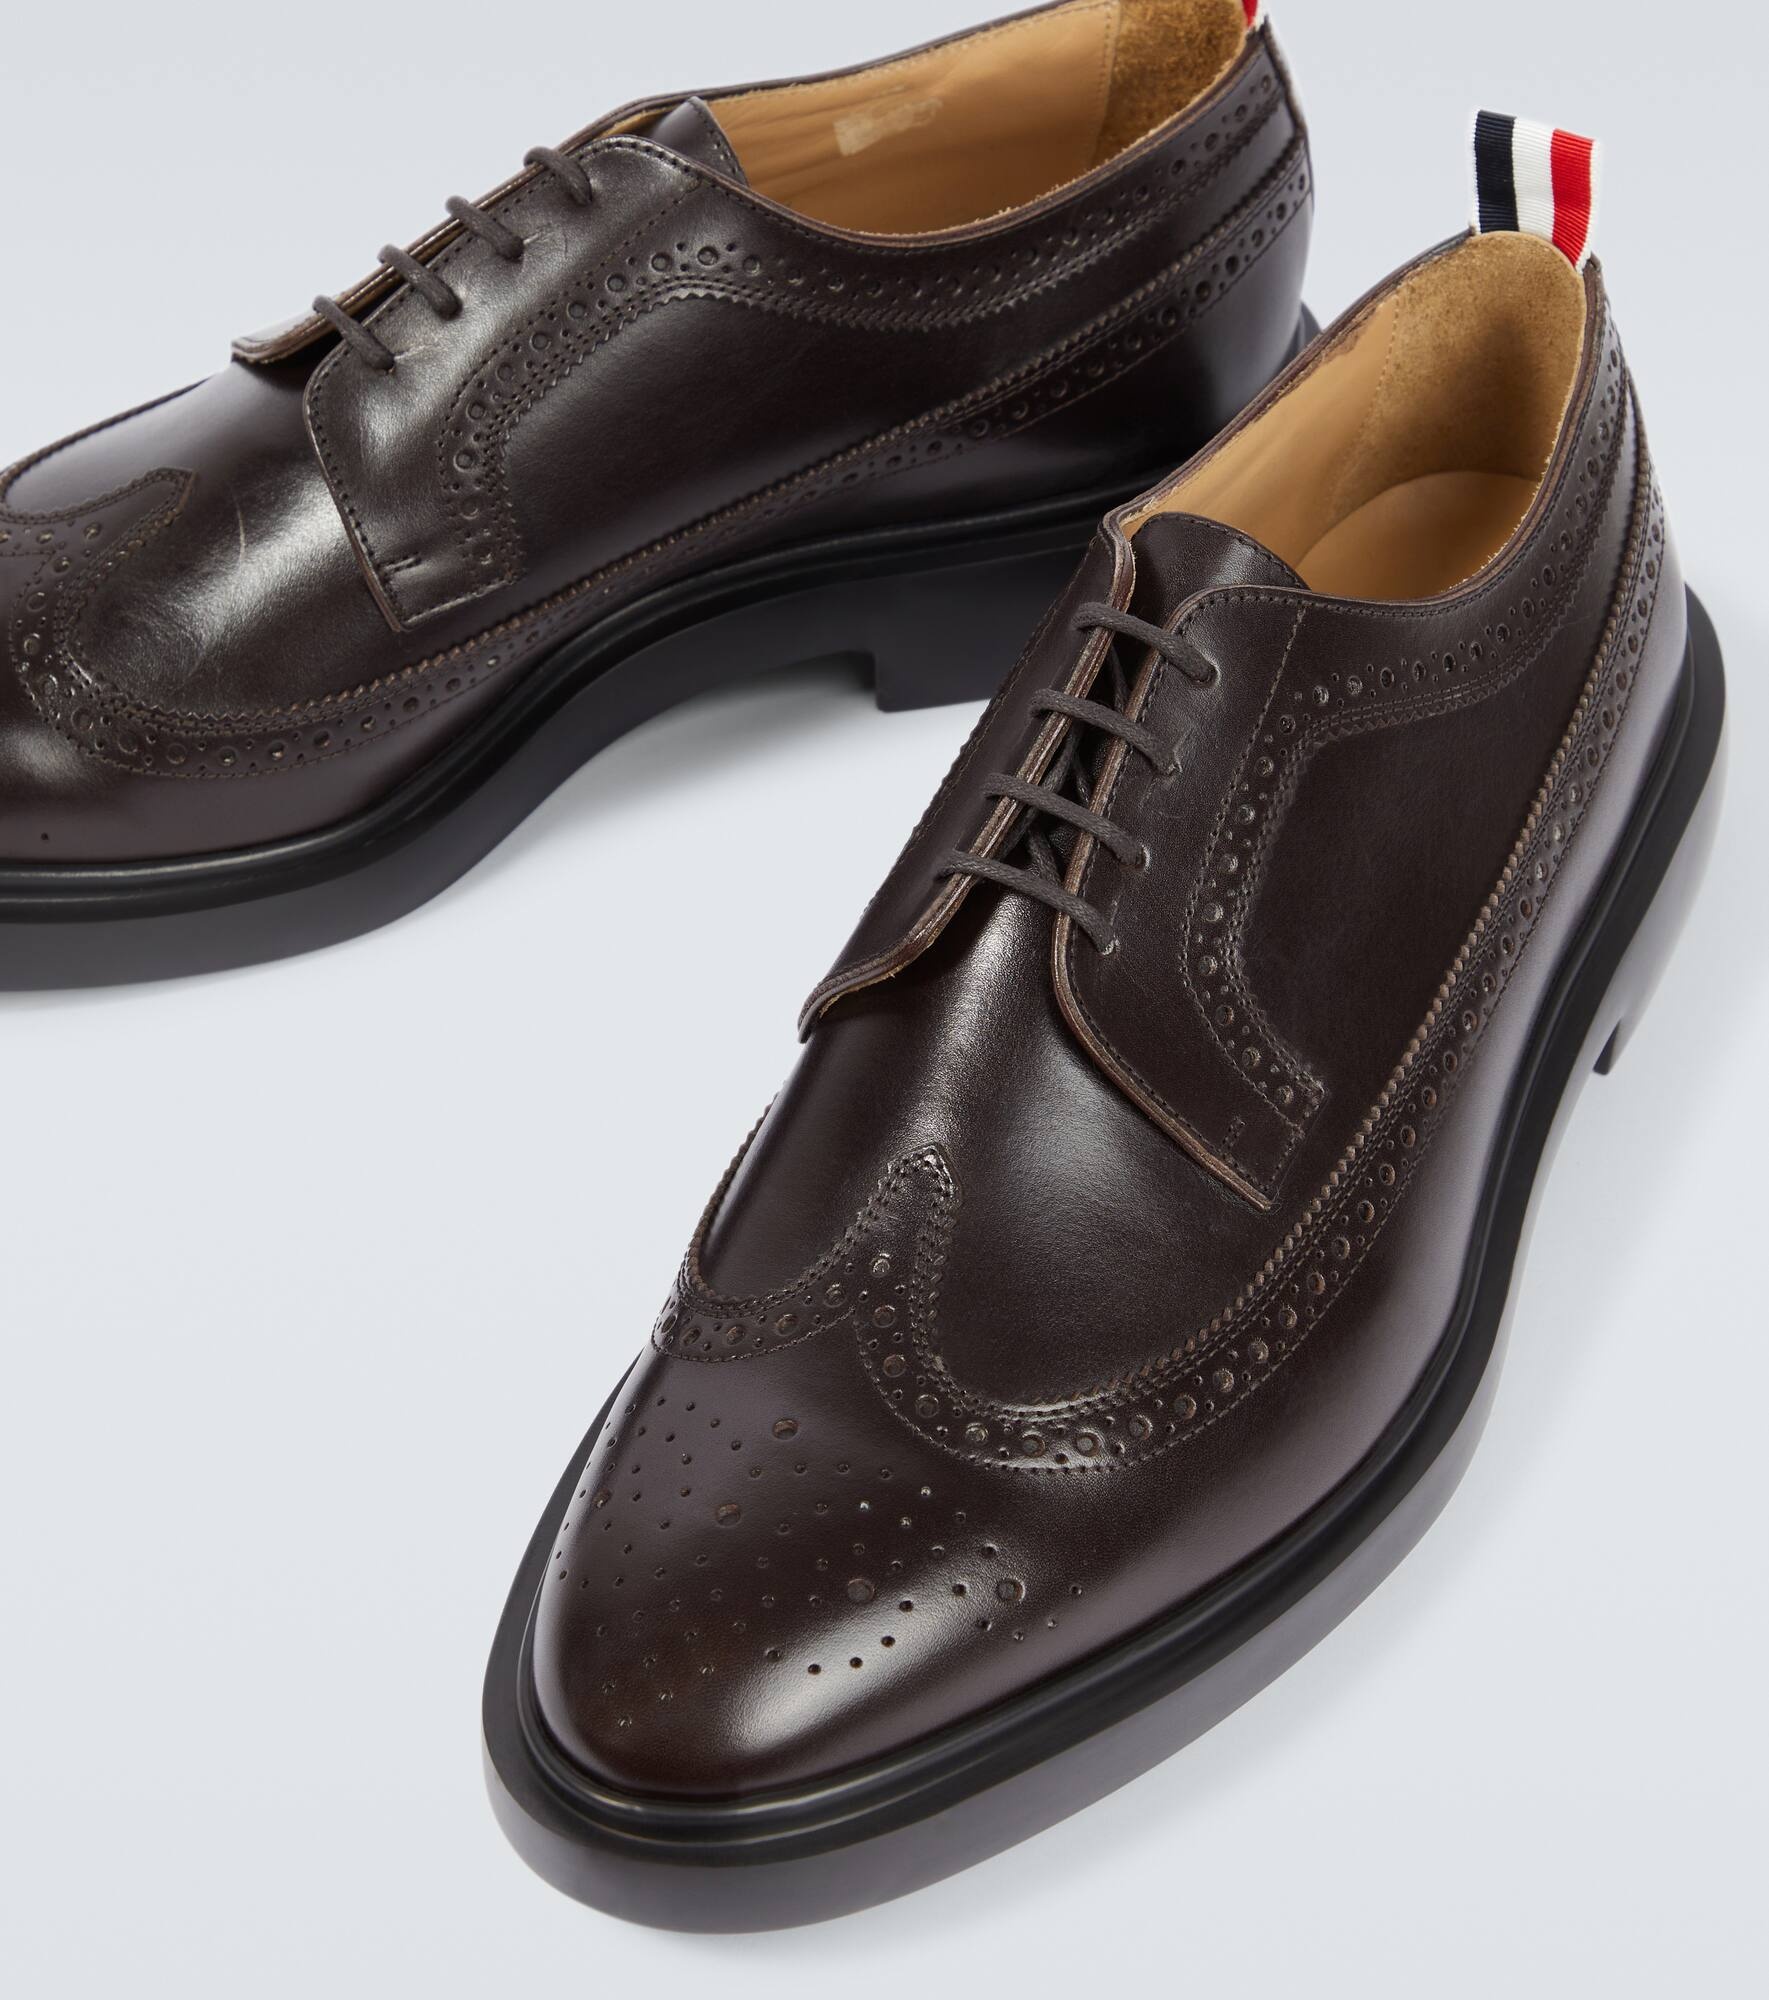 Longwing leather derby shoes - 3